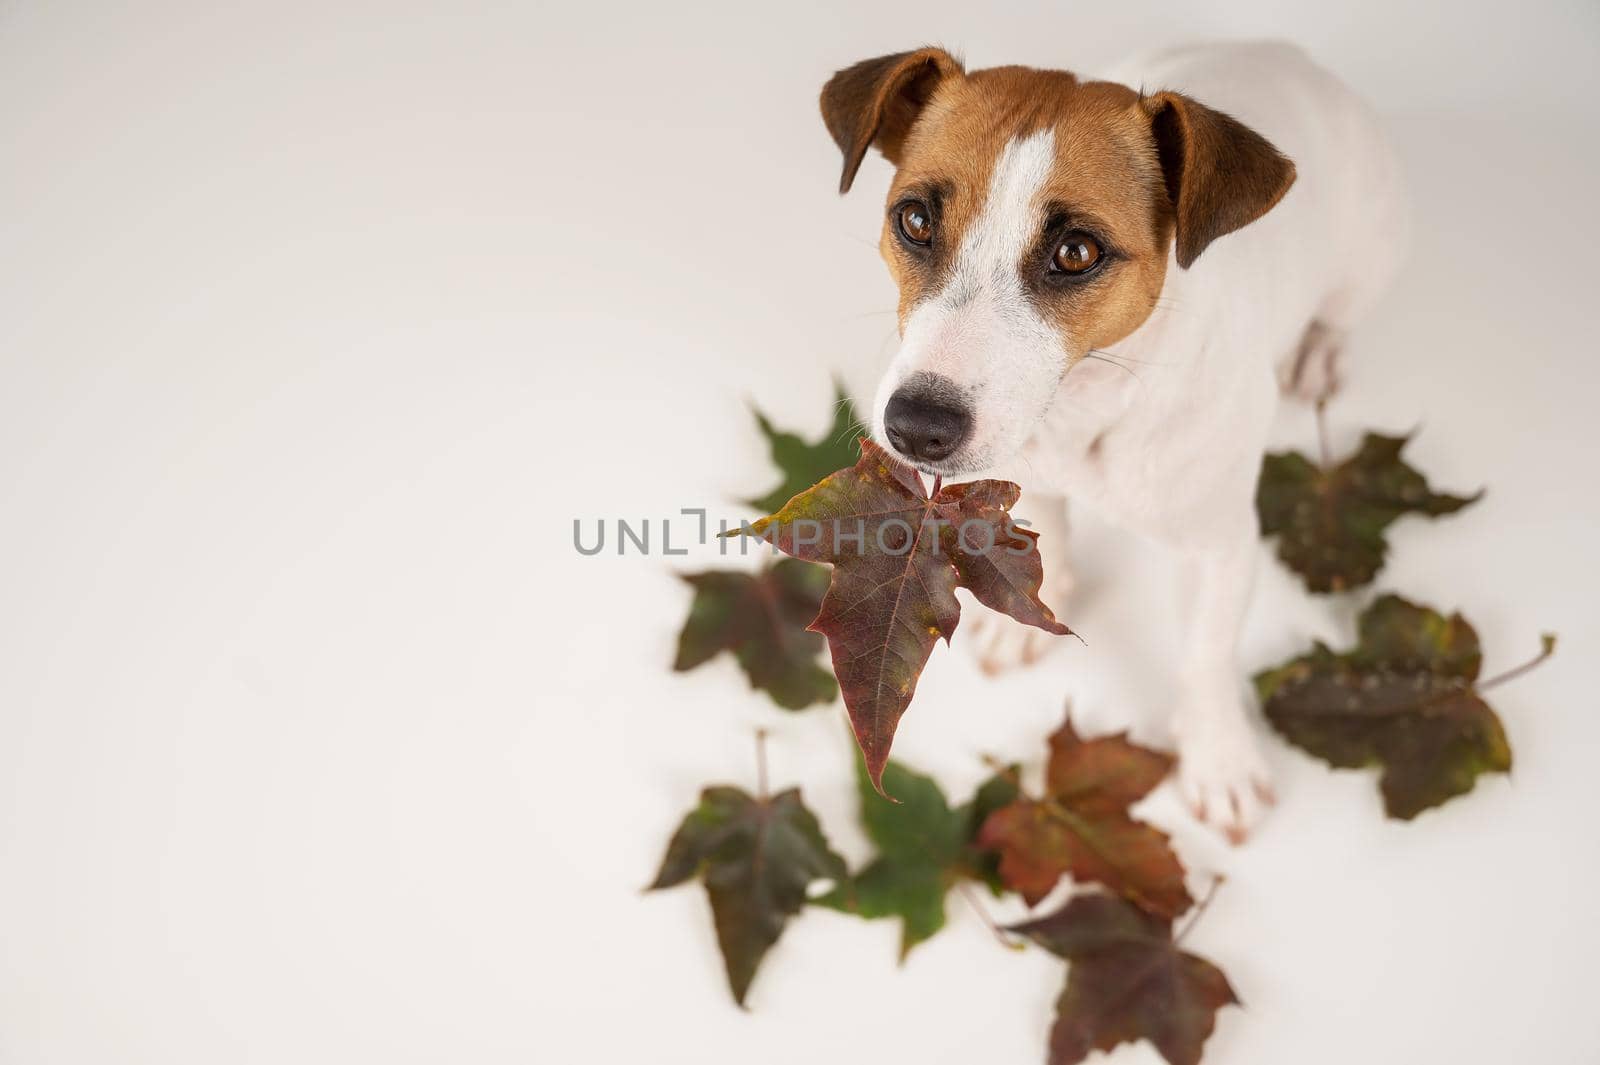 The dog is holding a bunch of maple leaves on a white background